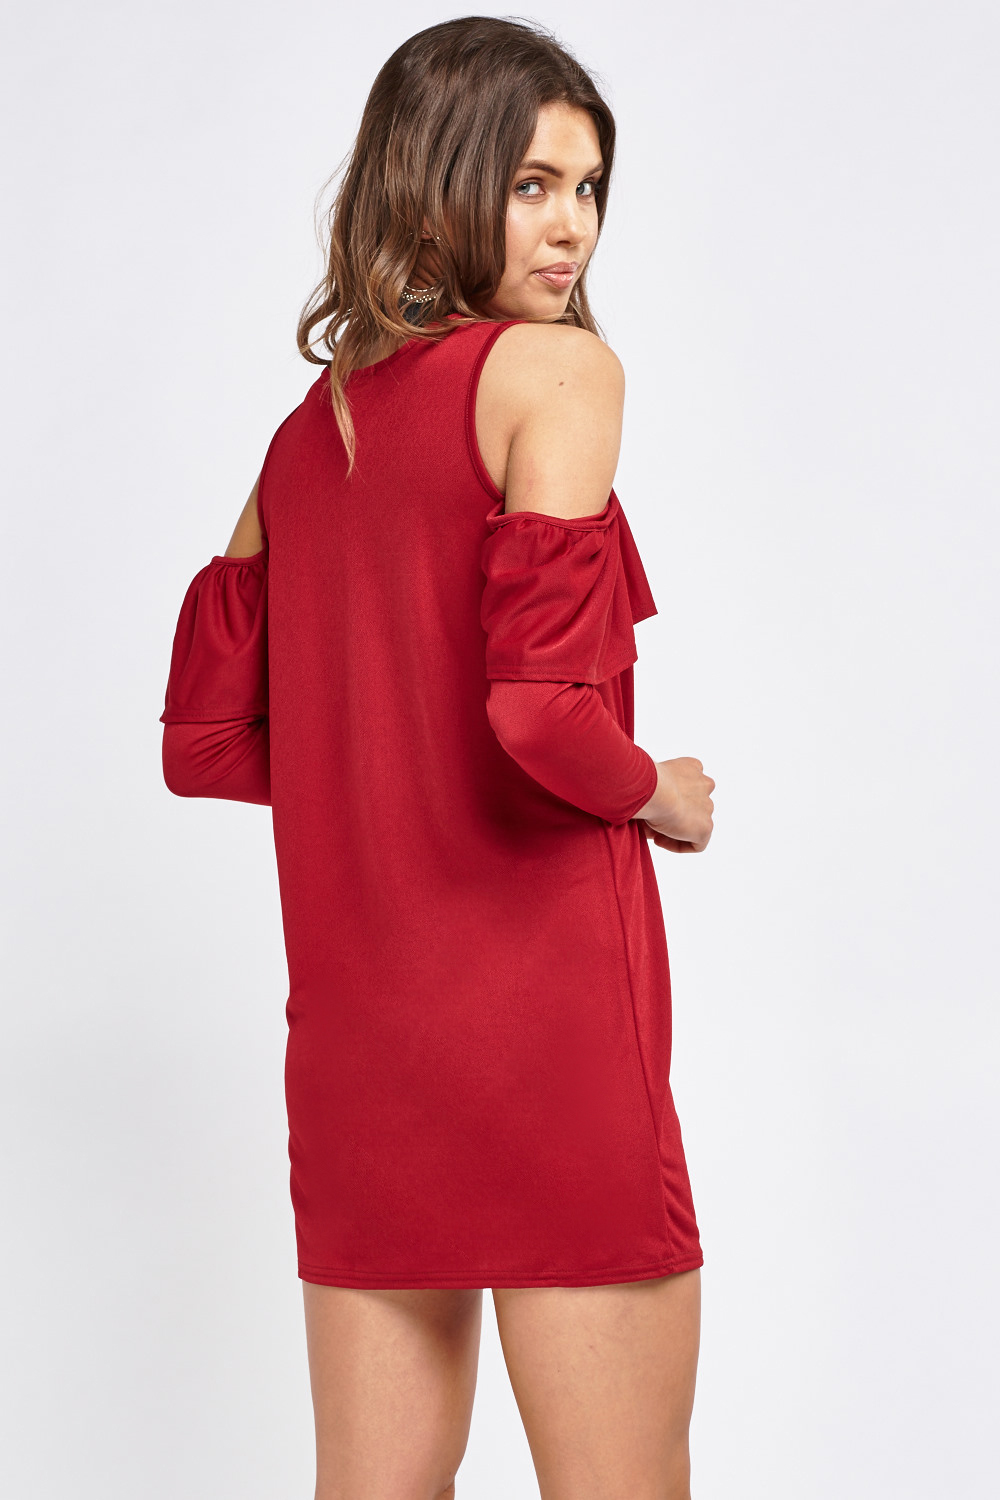 Criss-Cross Front With Frilly Cut Out Shoulder Dress - Just $2